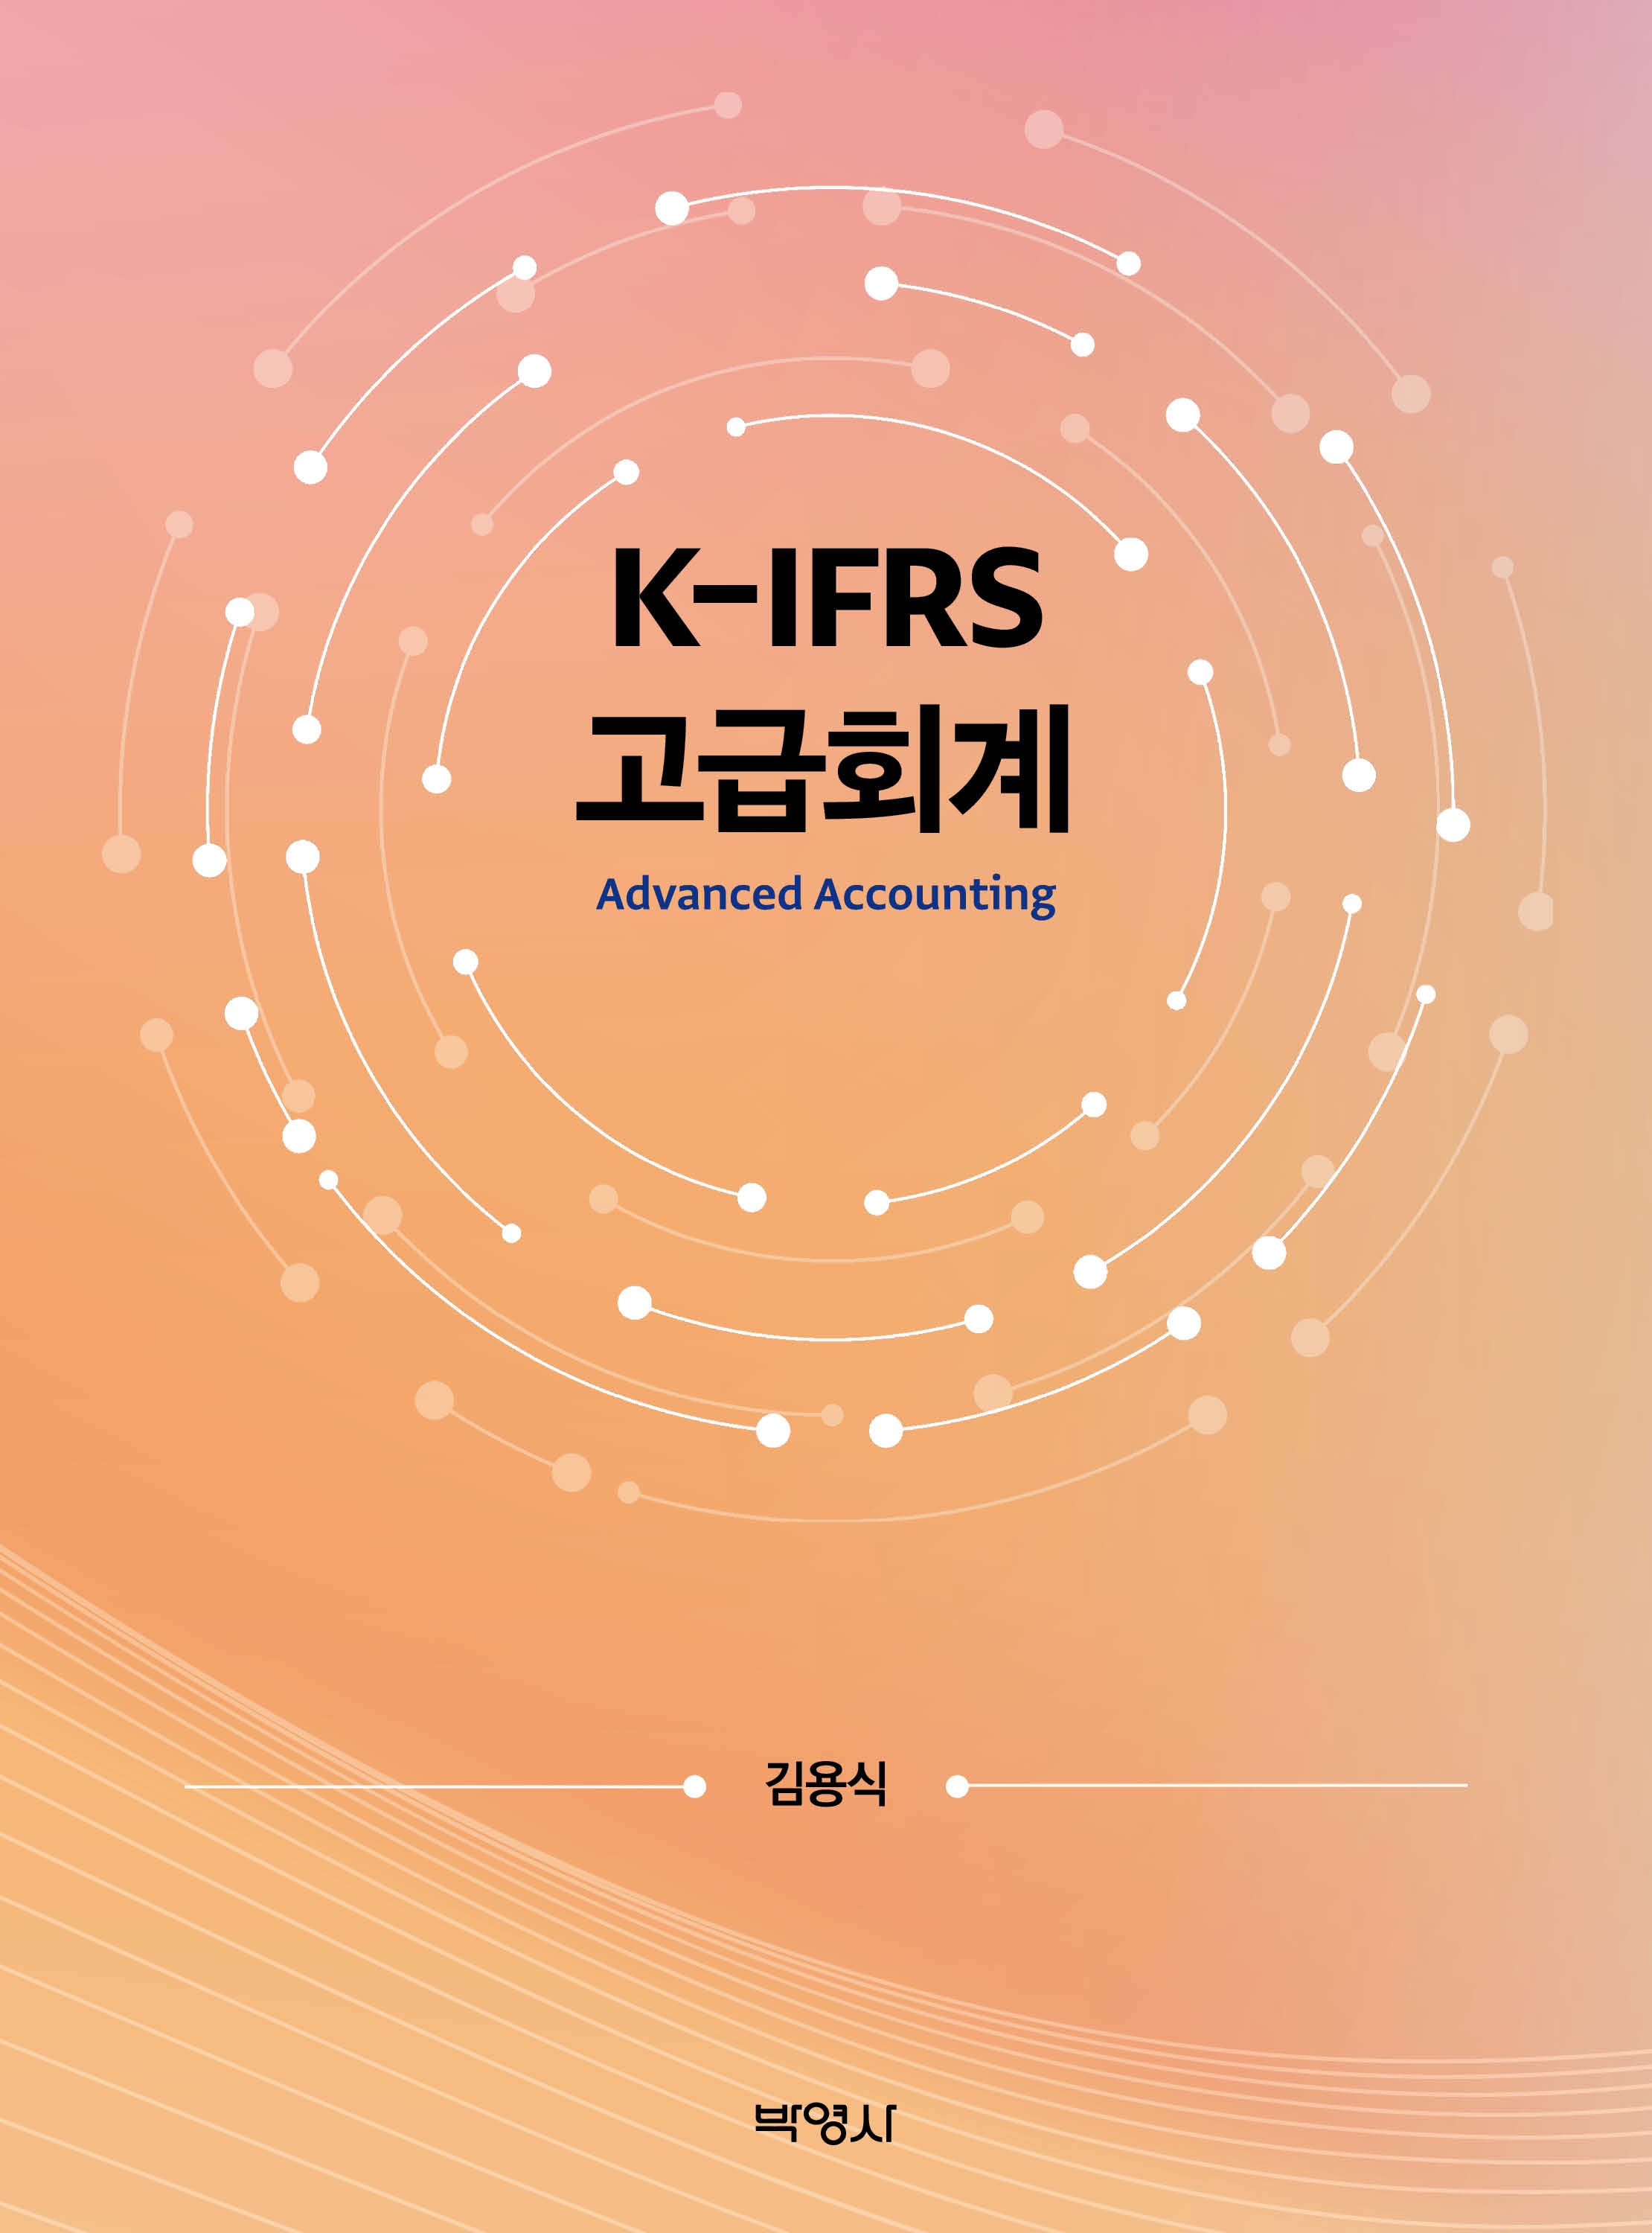 K-IFRS고급회계